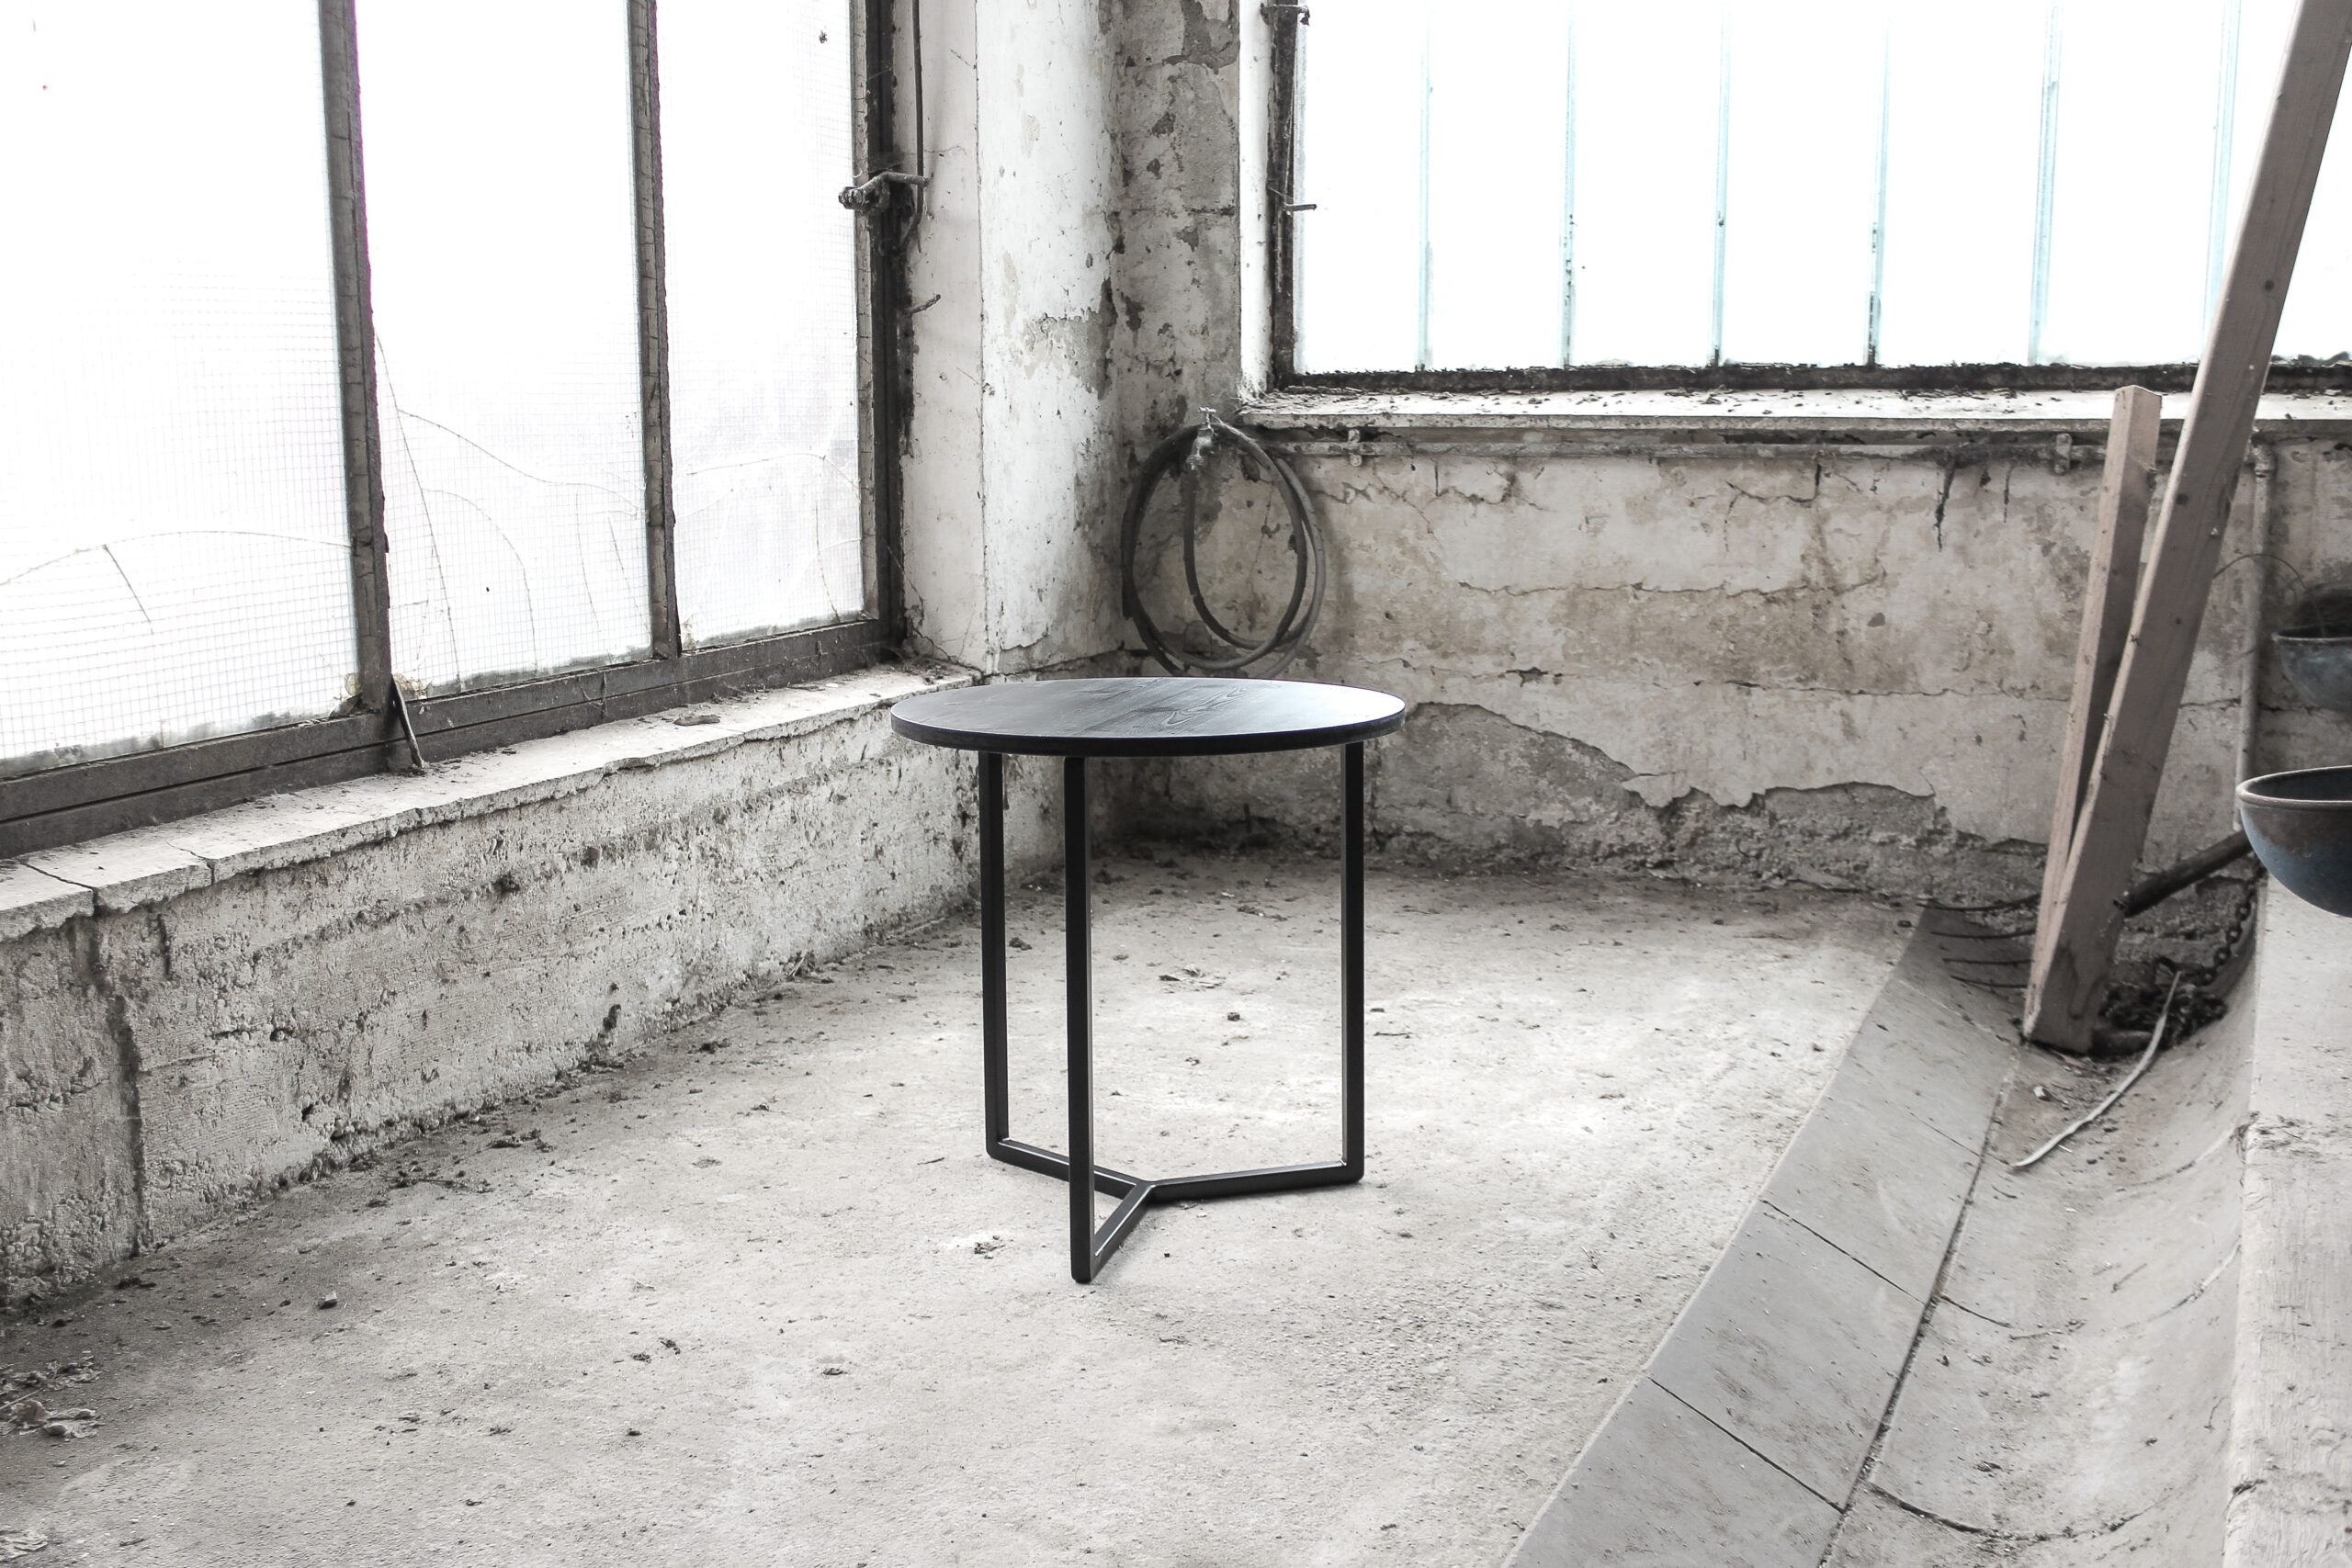 Prototype of a table in an abandand building